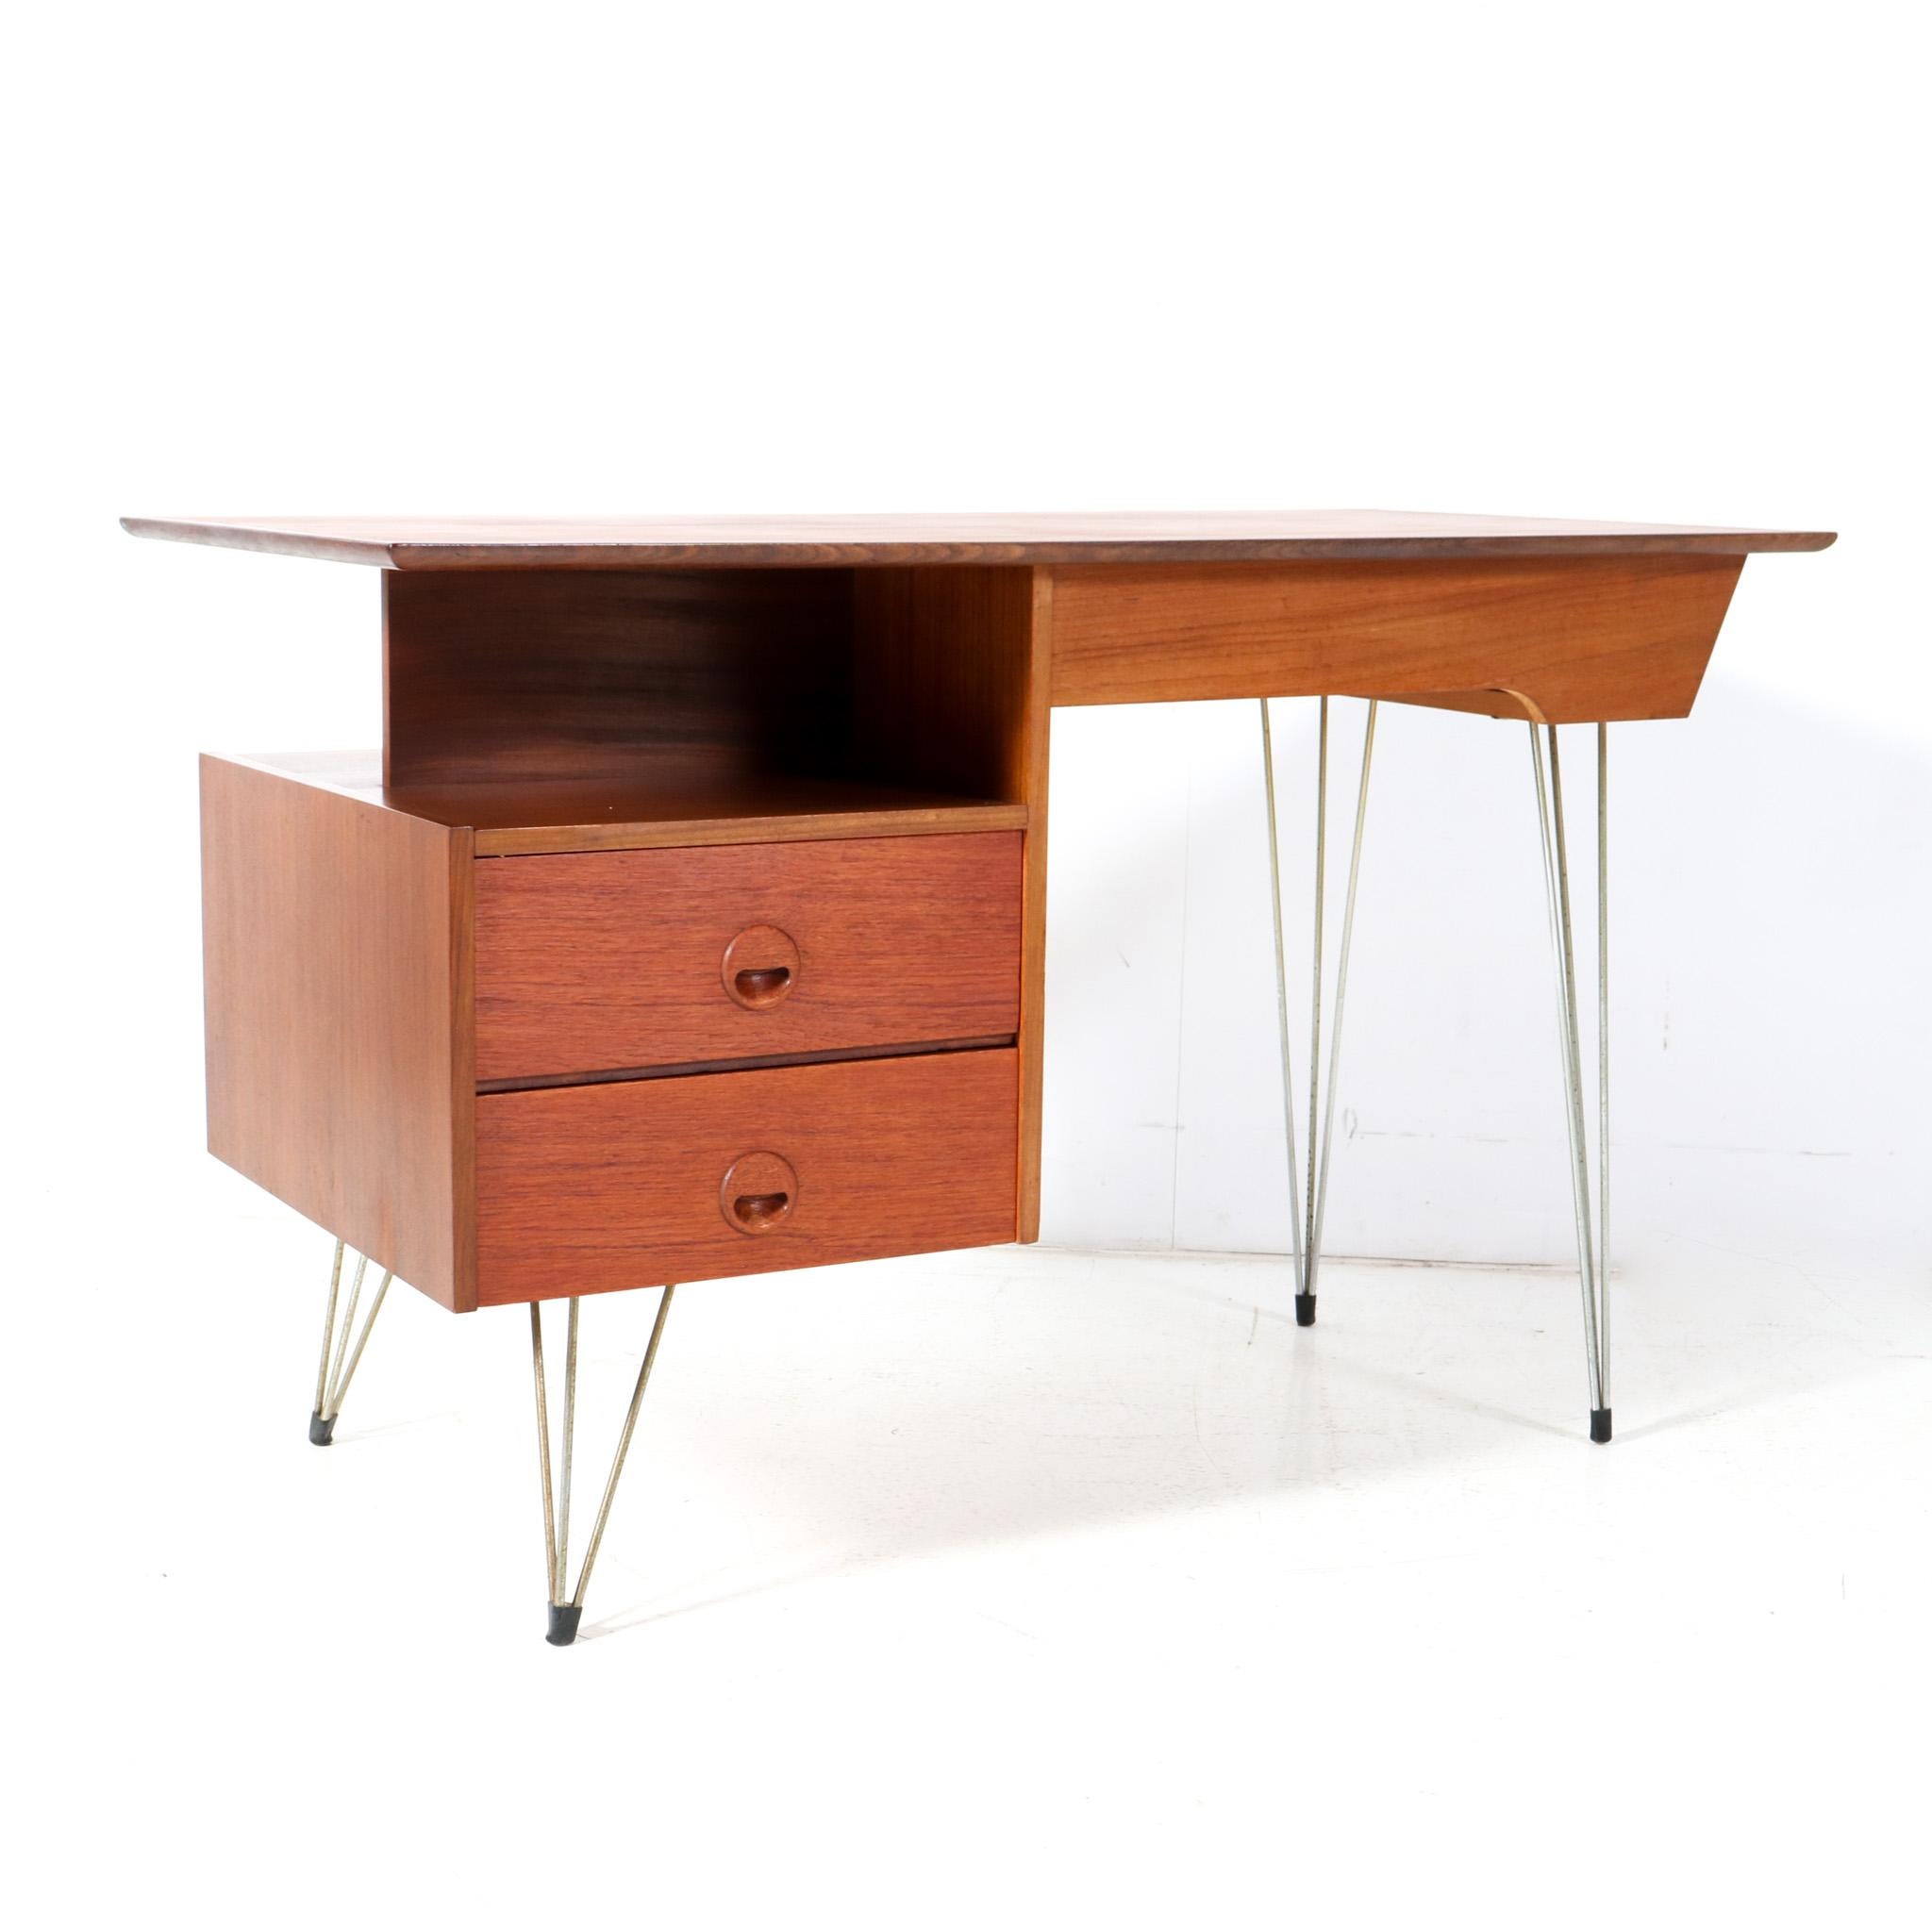 Stunning and elegant Mid-Century Modern desk or writing table.
Design by Louis Van Teeffelen for WéBé.
Striking Dutch design from the 1950s.
Minimalistic design in solid teak and original teak veneer with original lacquered metal hairpin legs.
Two